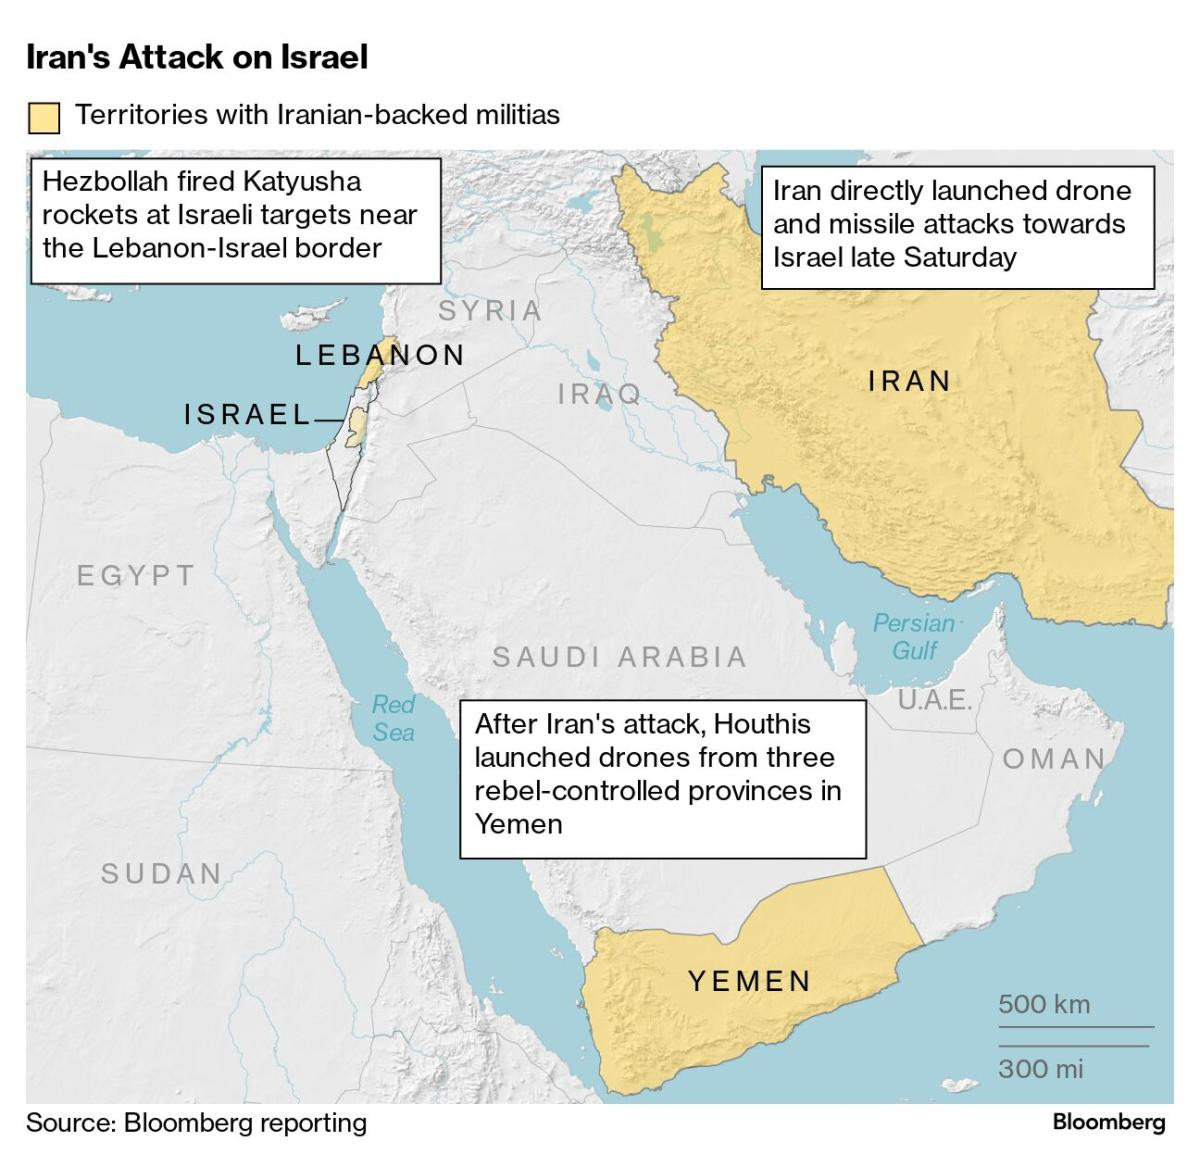 Iran's Attack on Israel Sparks Race to Avert a Full-Blown War